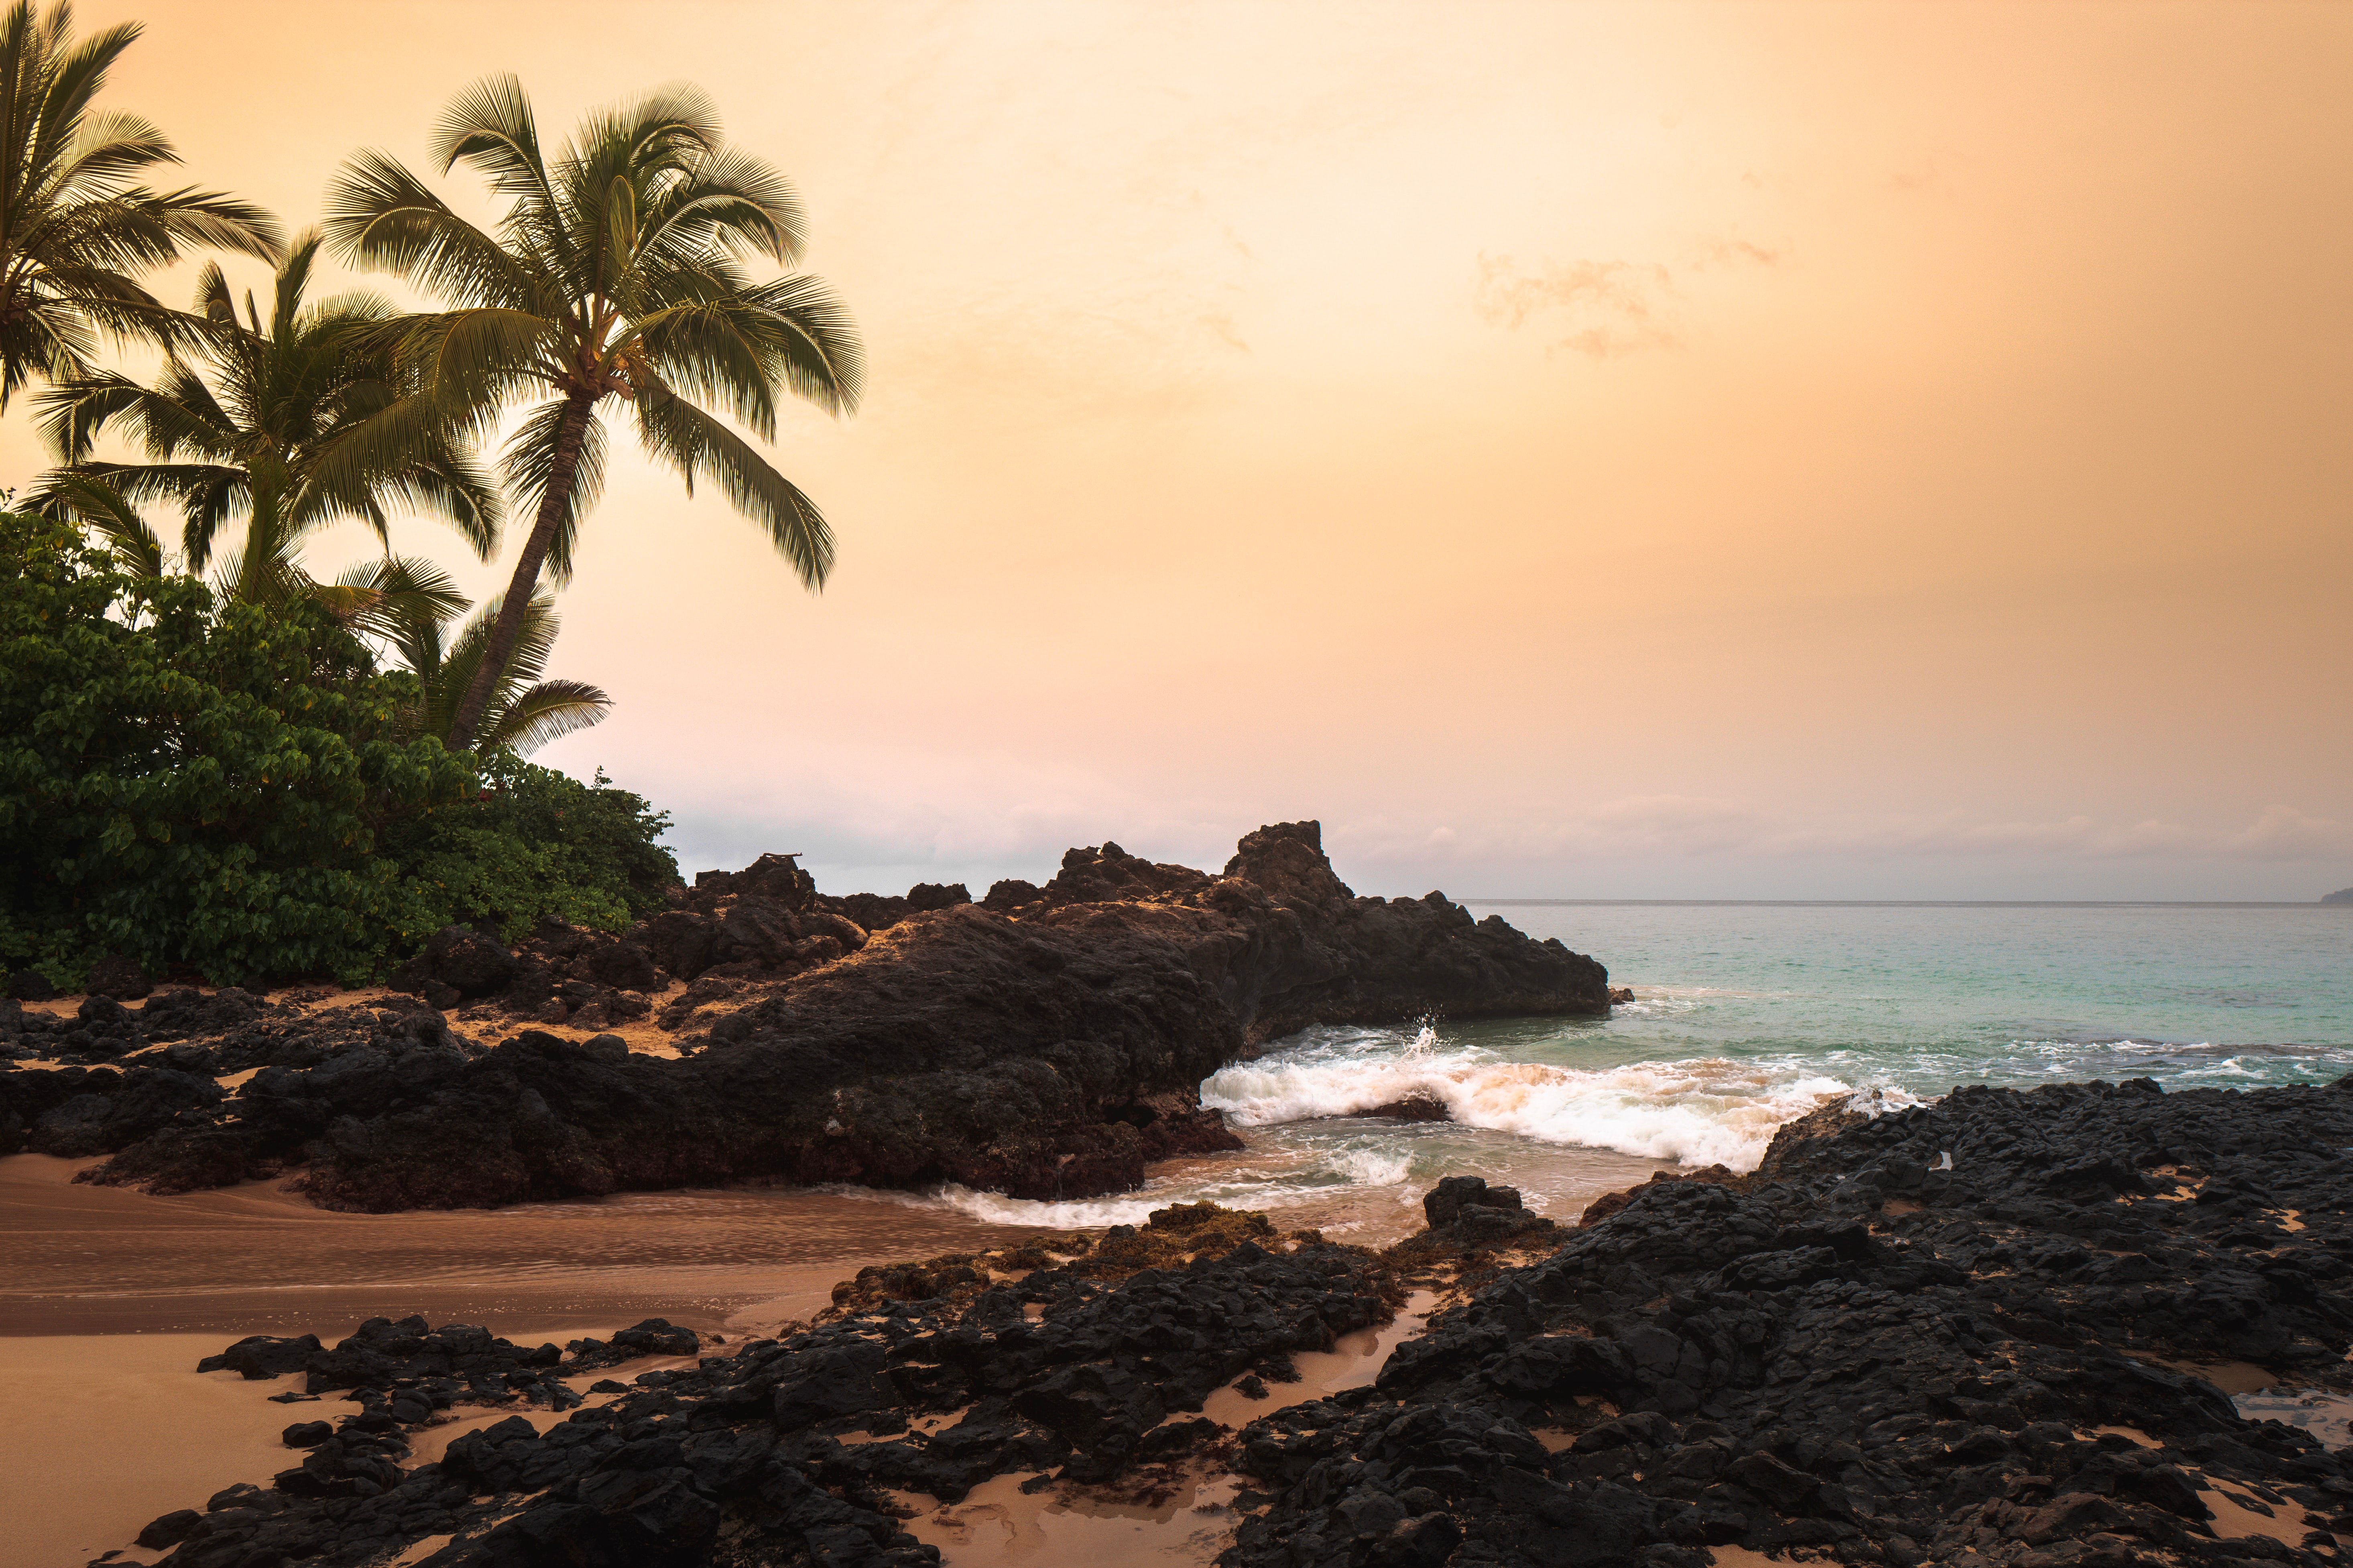 Hawaii 4K wallpaper for your desktop or mobile screen free and easy to download